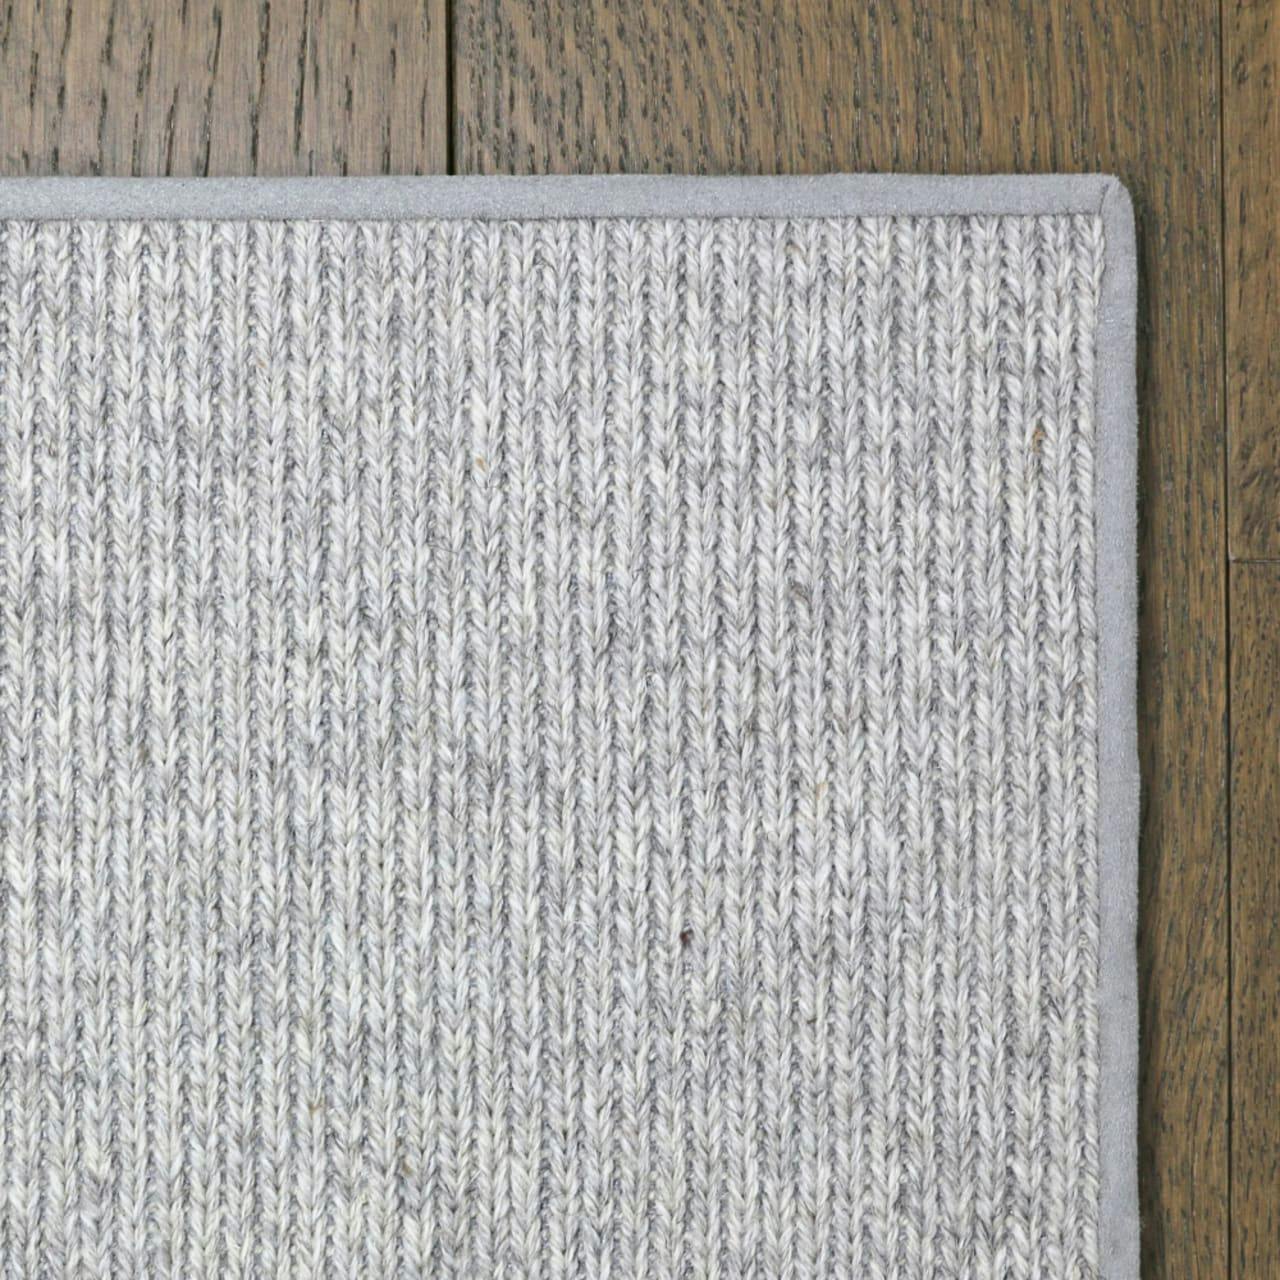 The Sweater Seashell wool rug with blind soft border